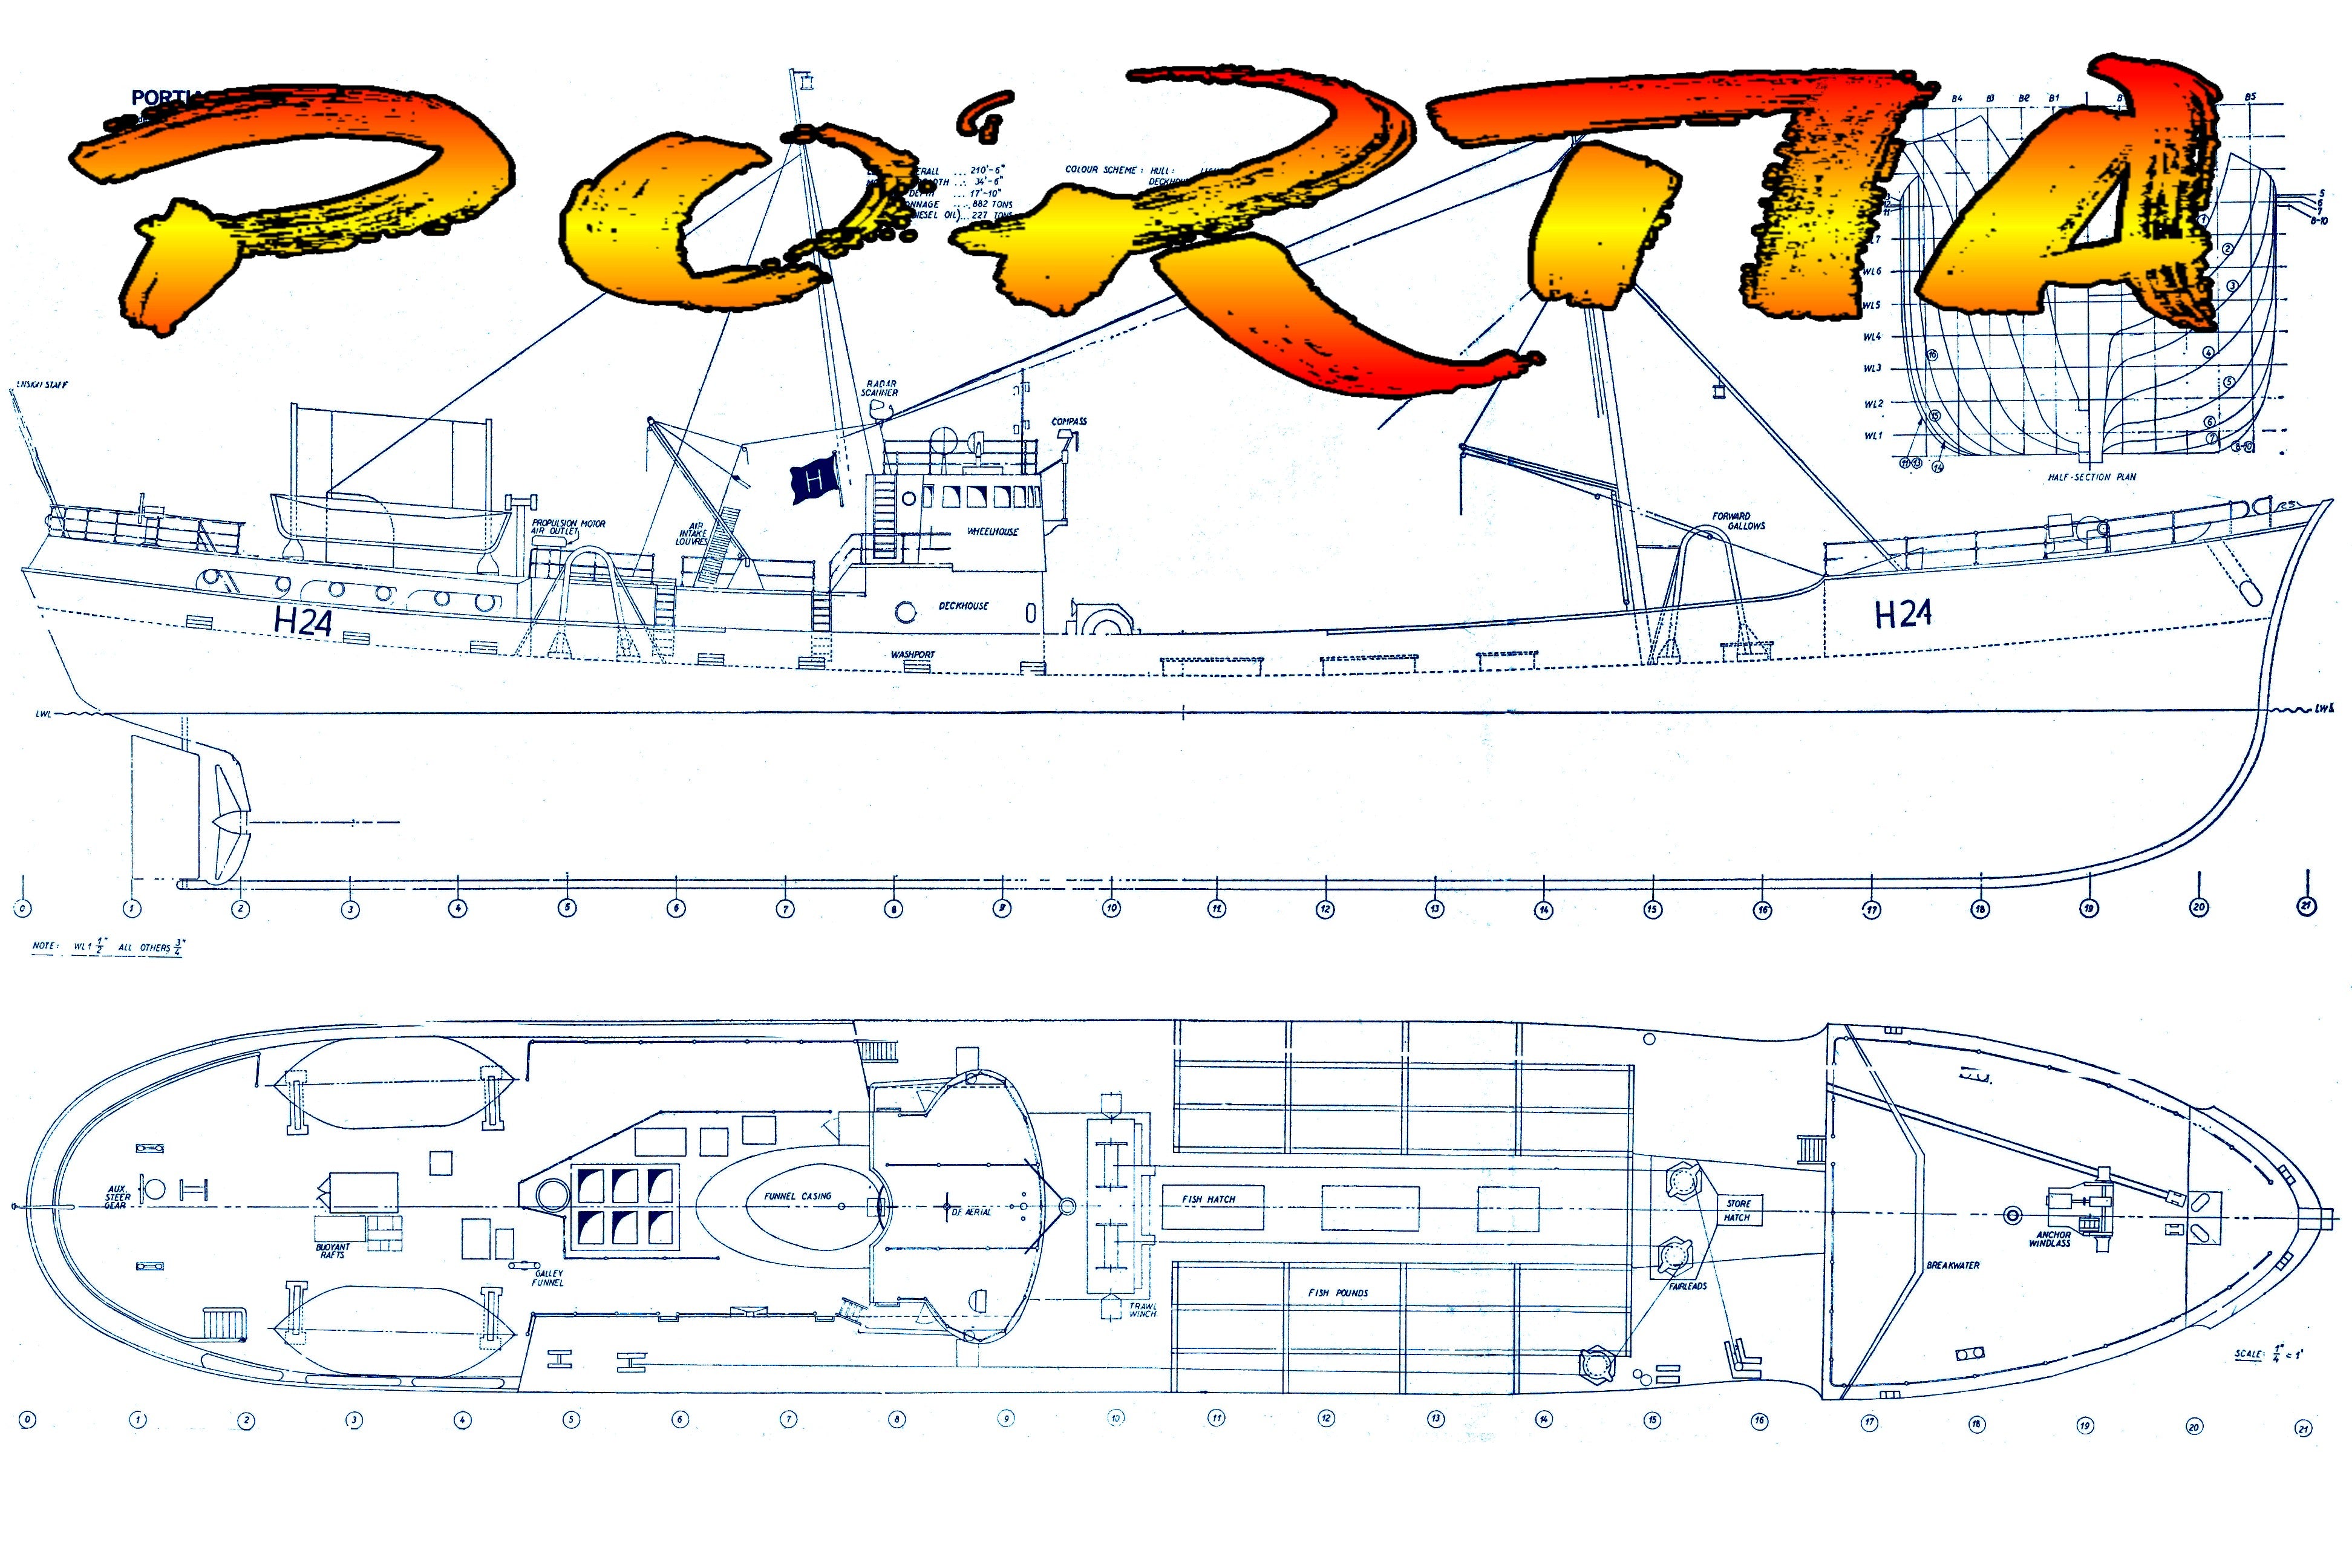 full size printed plan scale 1:48 britain's largest and fastest trawle 'portia' suitable for radio control